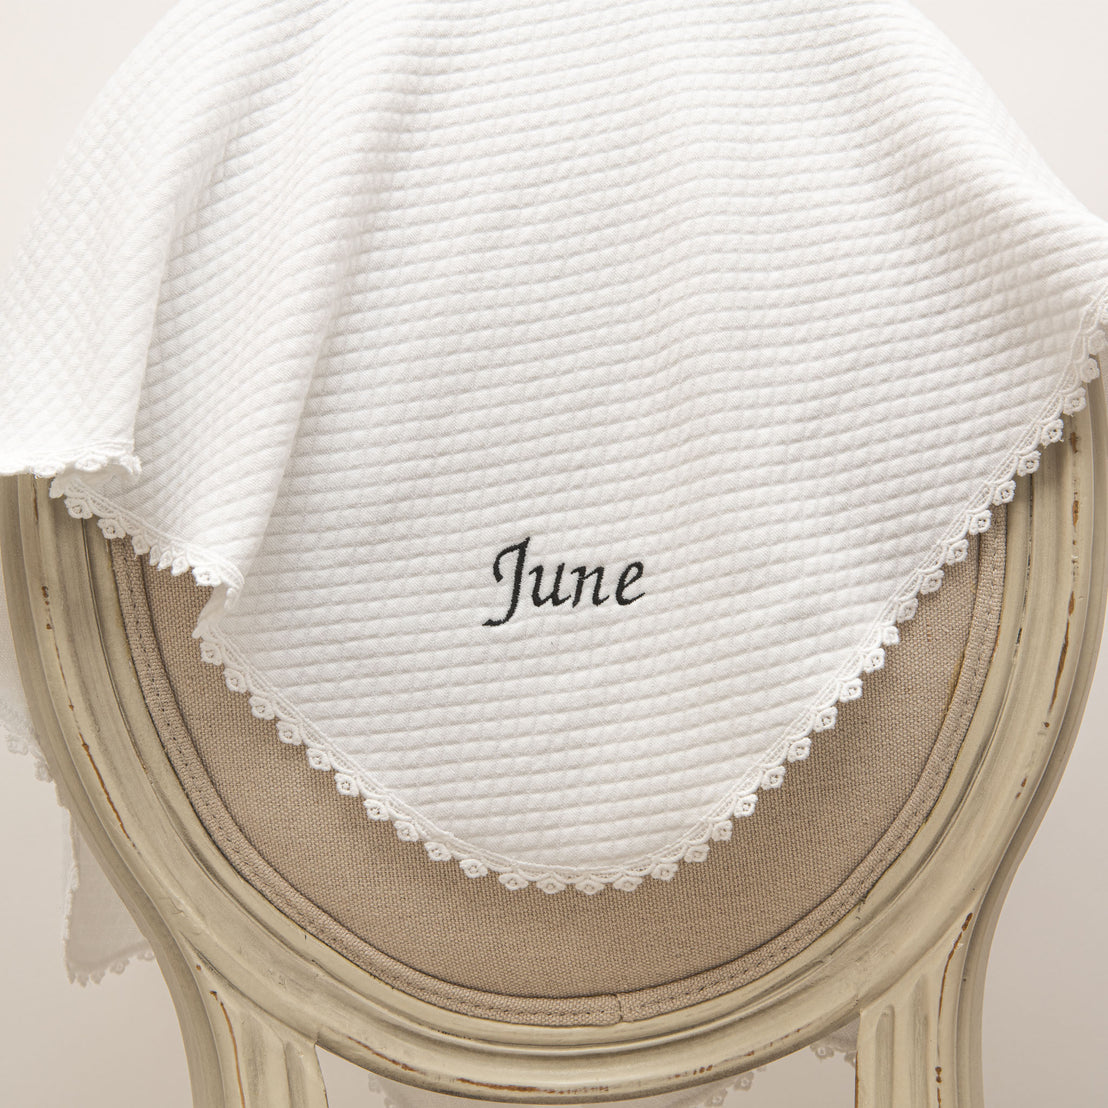 A close-up of a vintage wooden chair with a white June Personalized Blanket draped over it, featuring the word "June" embroidered in the center, surrounded by stylish lace trim.